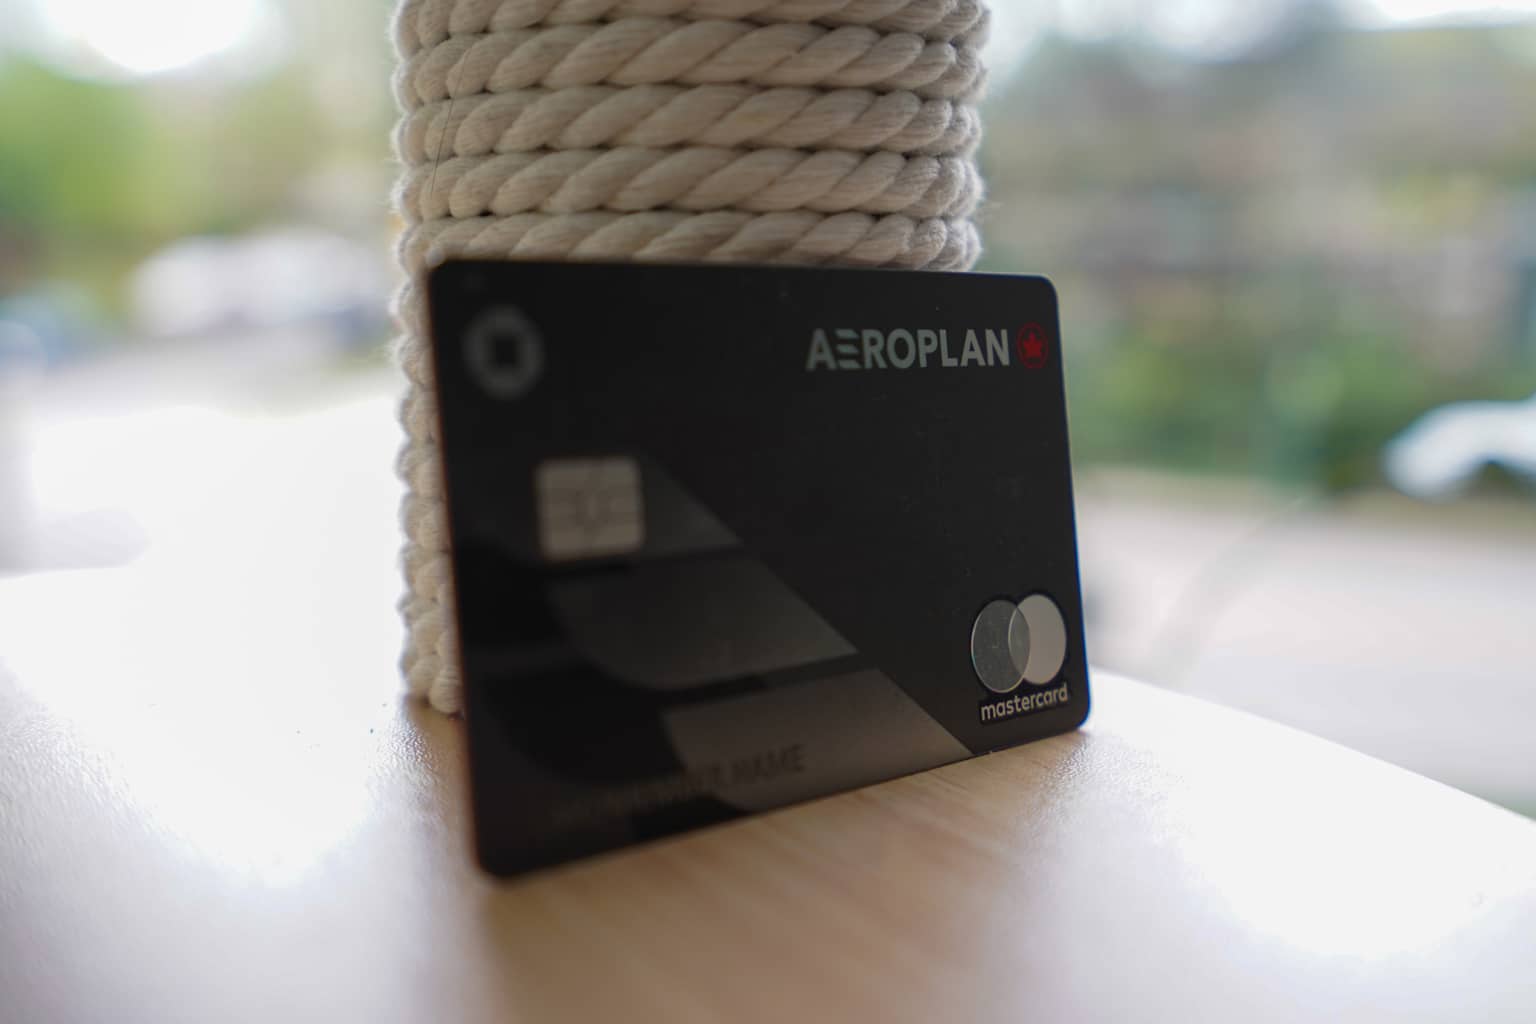 Chase Aeroplan Card: New Supply of 70,000 Factors